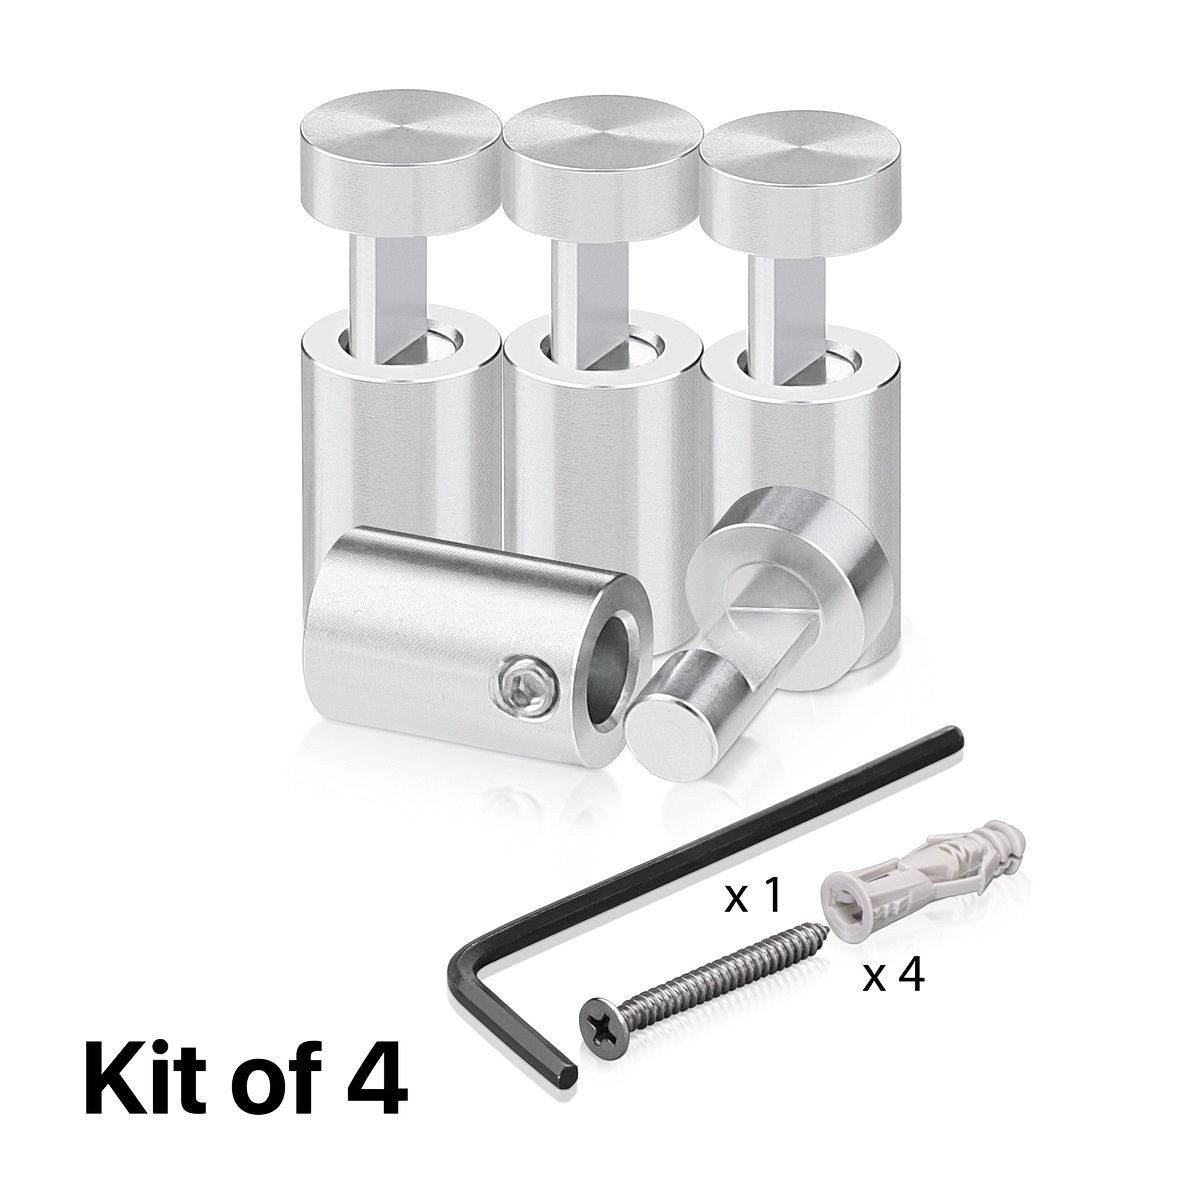 (Set of 4) 1/2'' Diameter X 3/4'' Barrel Length, Aluminum Clear Shiny Anodized Finish. Adjustable Edge Grip Standoff with (4) 2208Z Screw and (4) LANC1 Anchor  for concrete/drywall (For Inside Use Only)